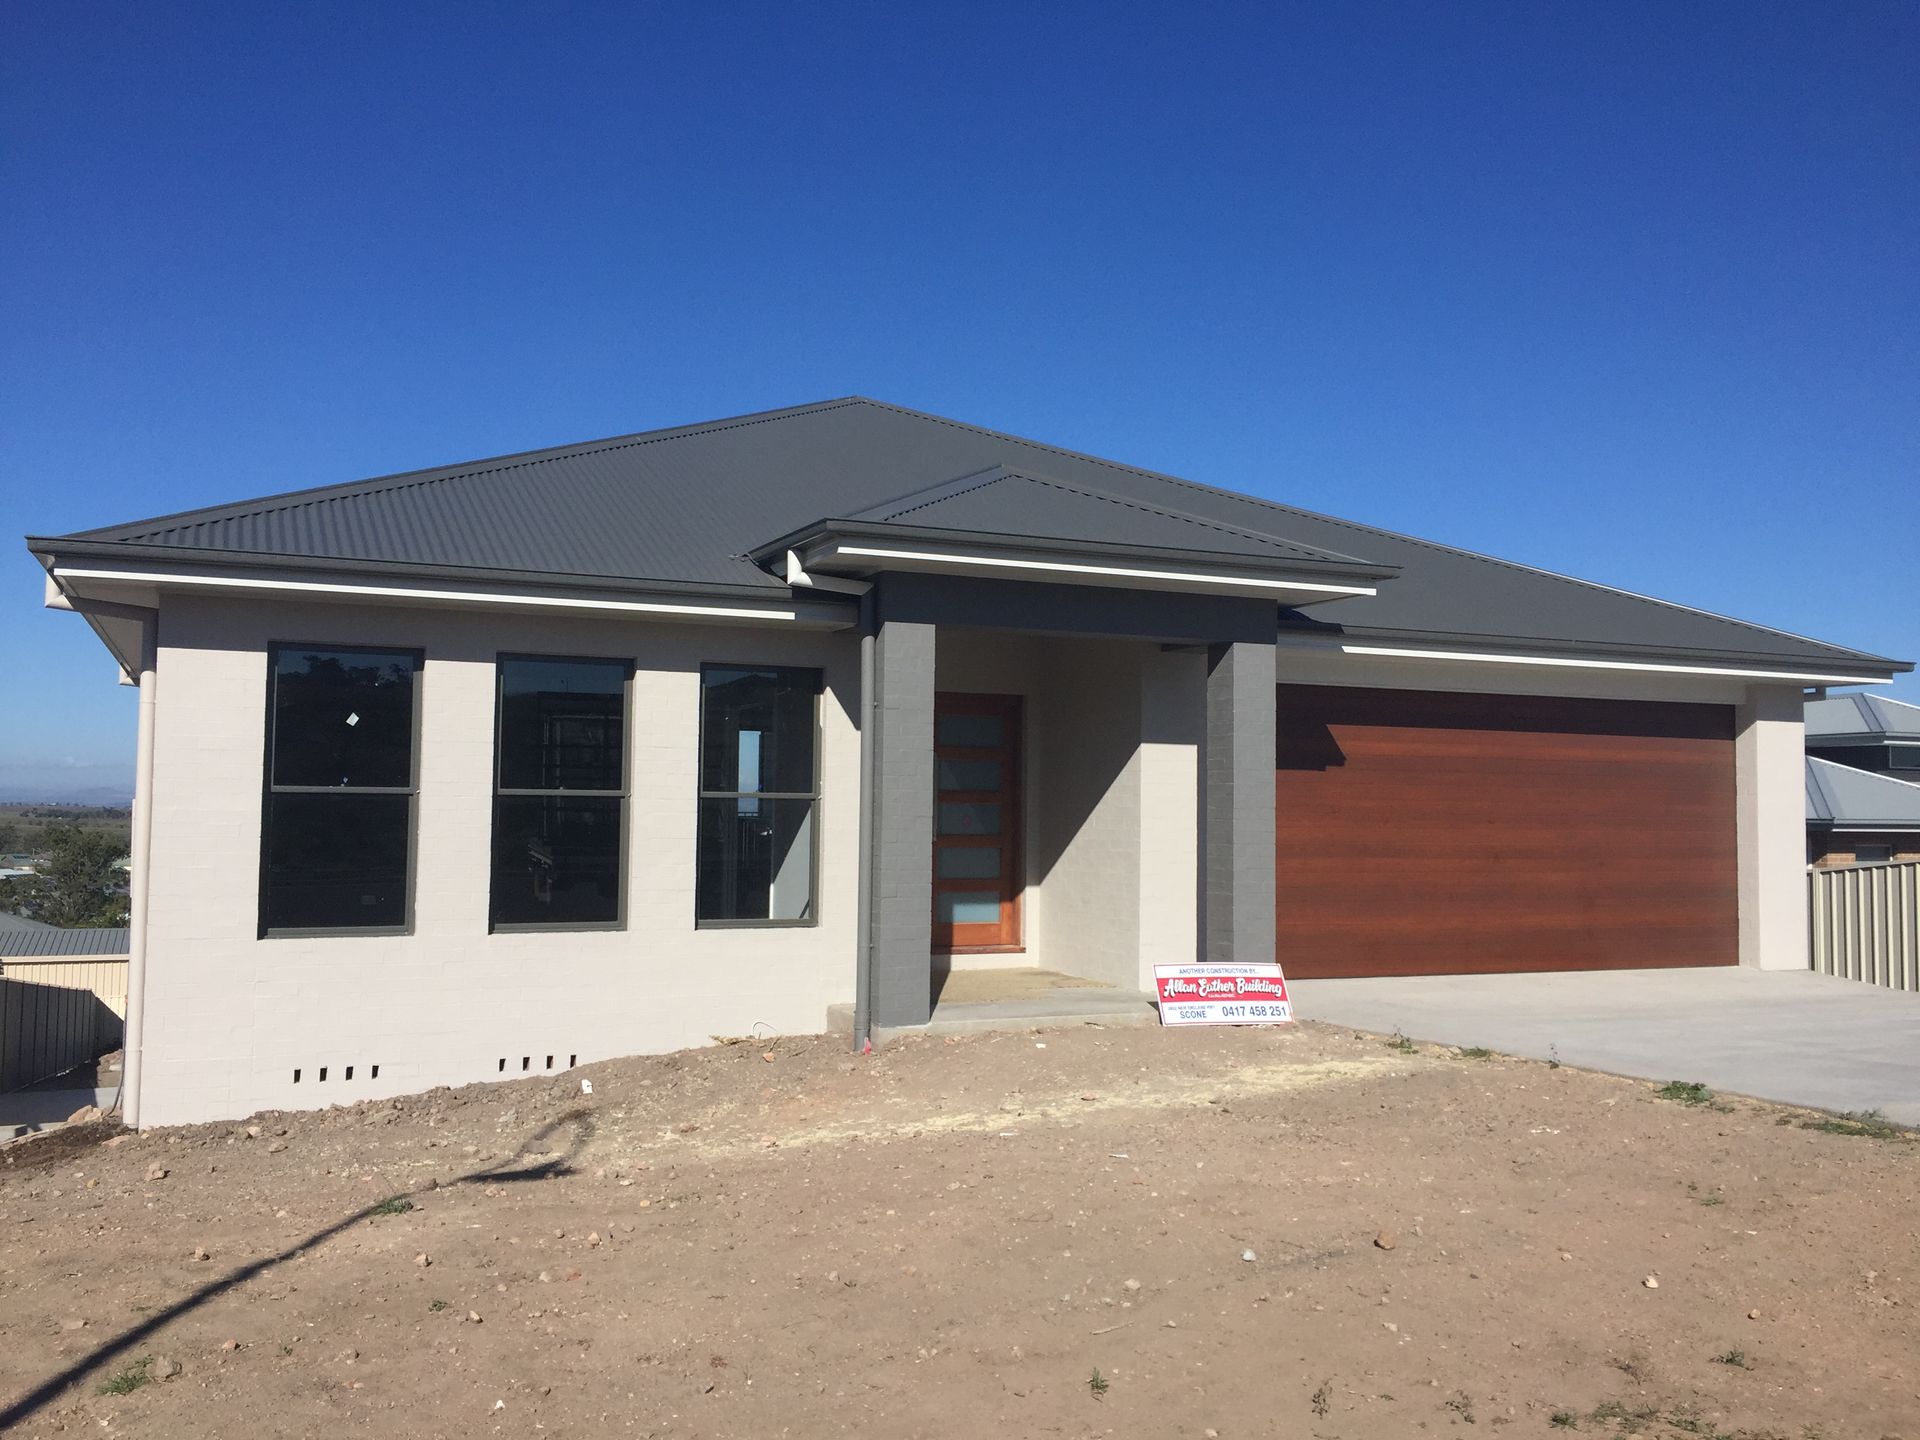 Timber floors led the way to the entrance — Windows & Doors in Gunnedah, NSW